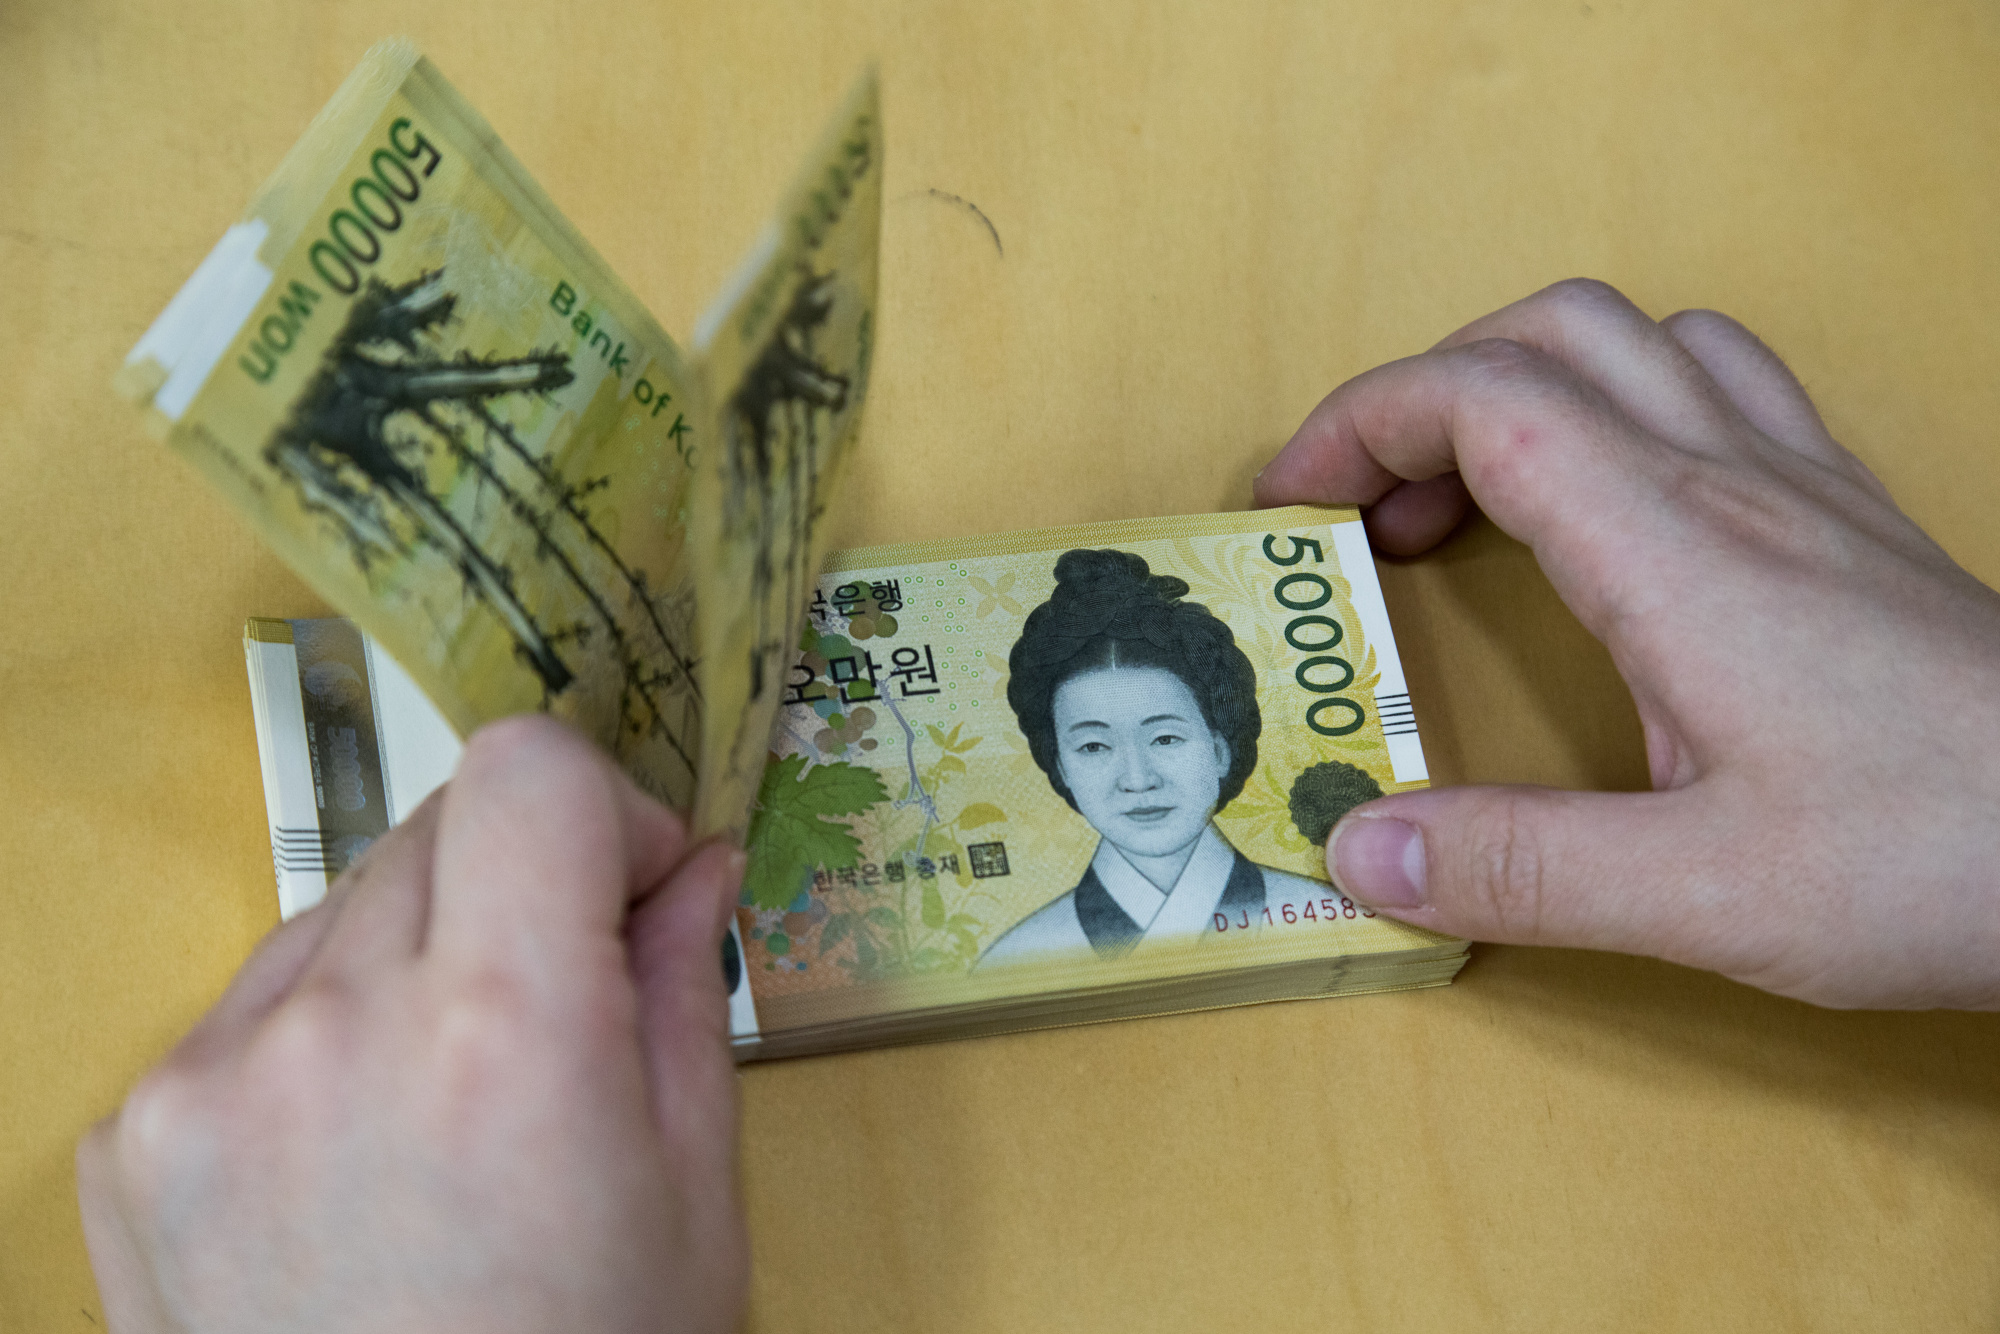 USD to PHP: Dollar Rebound Batters Philippine Peso Ahead of Rate Decision -  Bloomberg